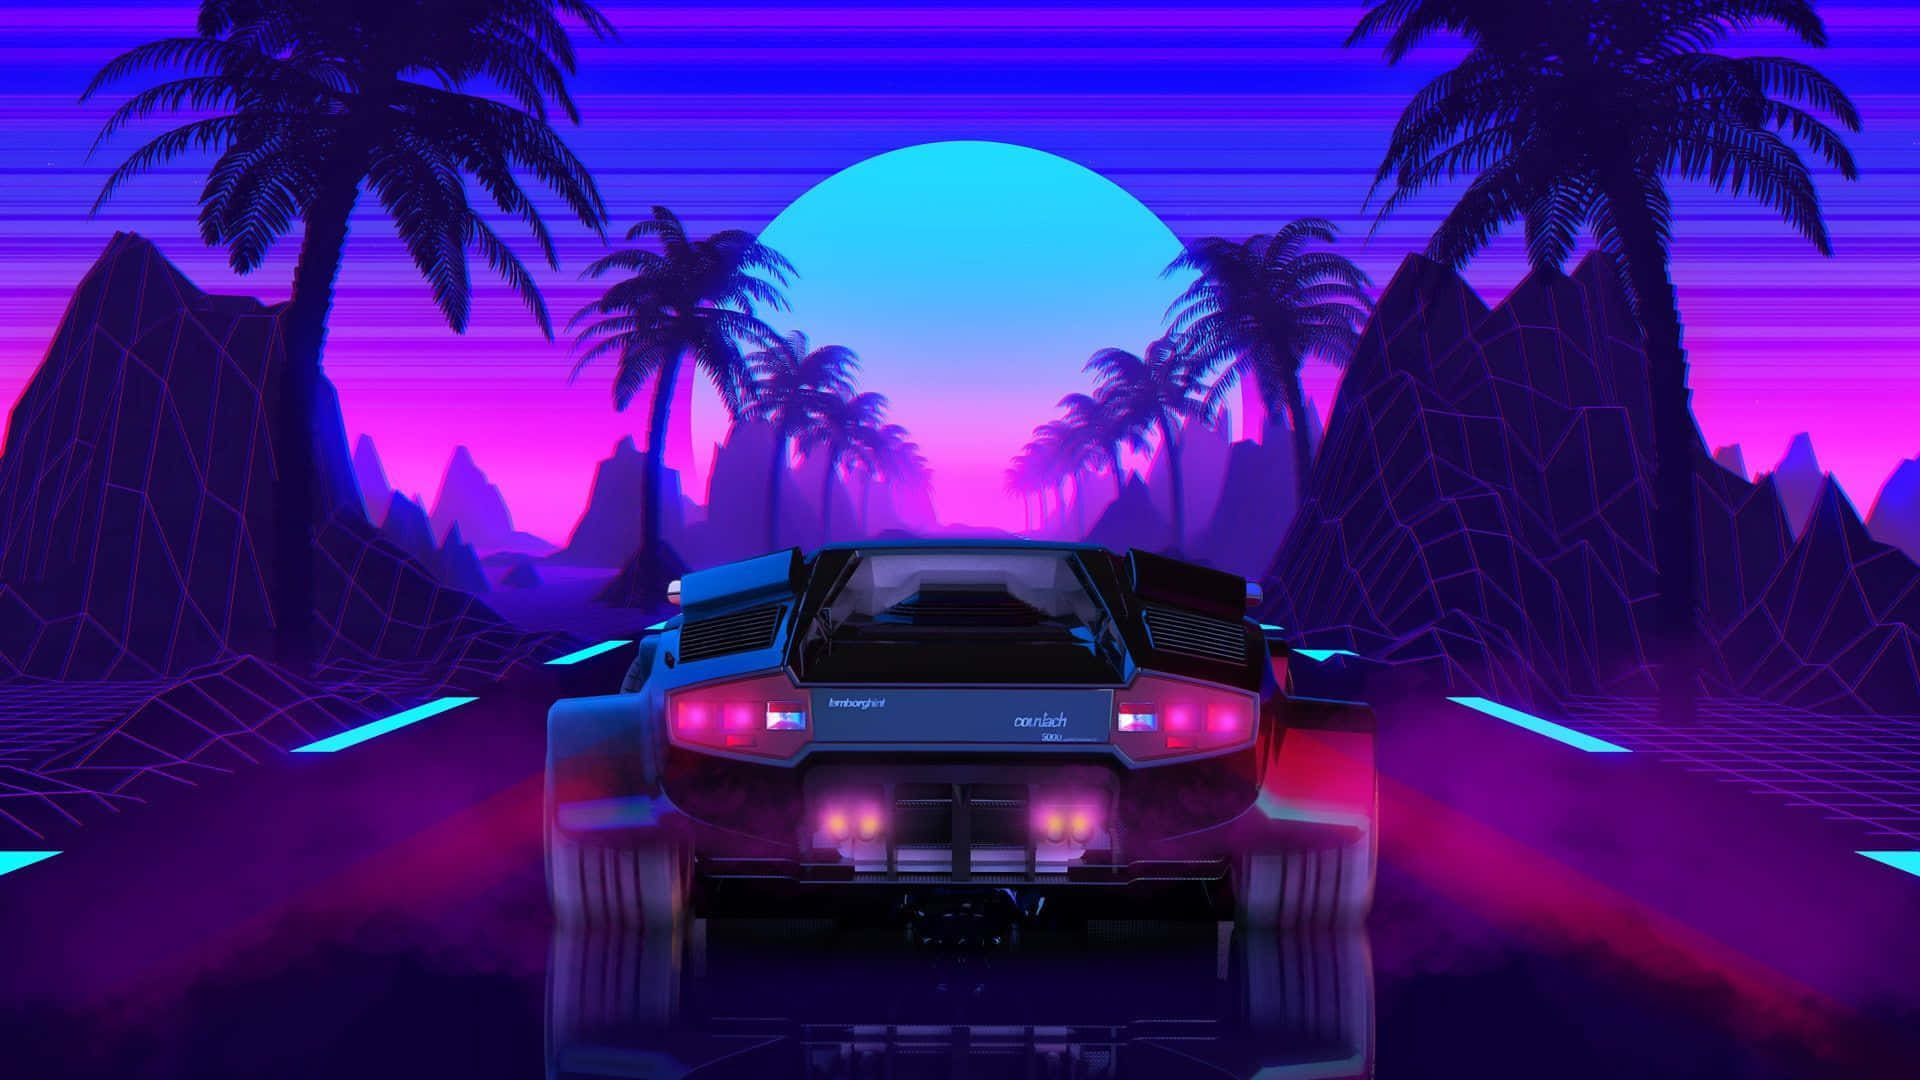 "Indulge in your 80s nostalgia with this Synthwave background scene"